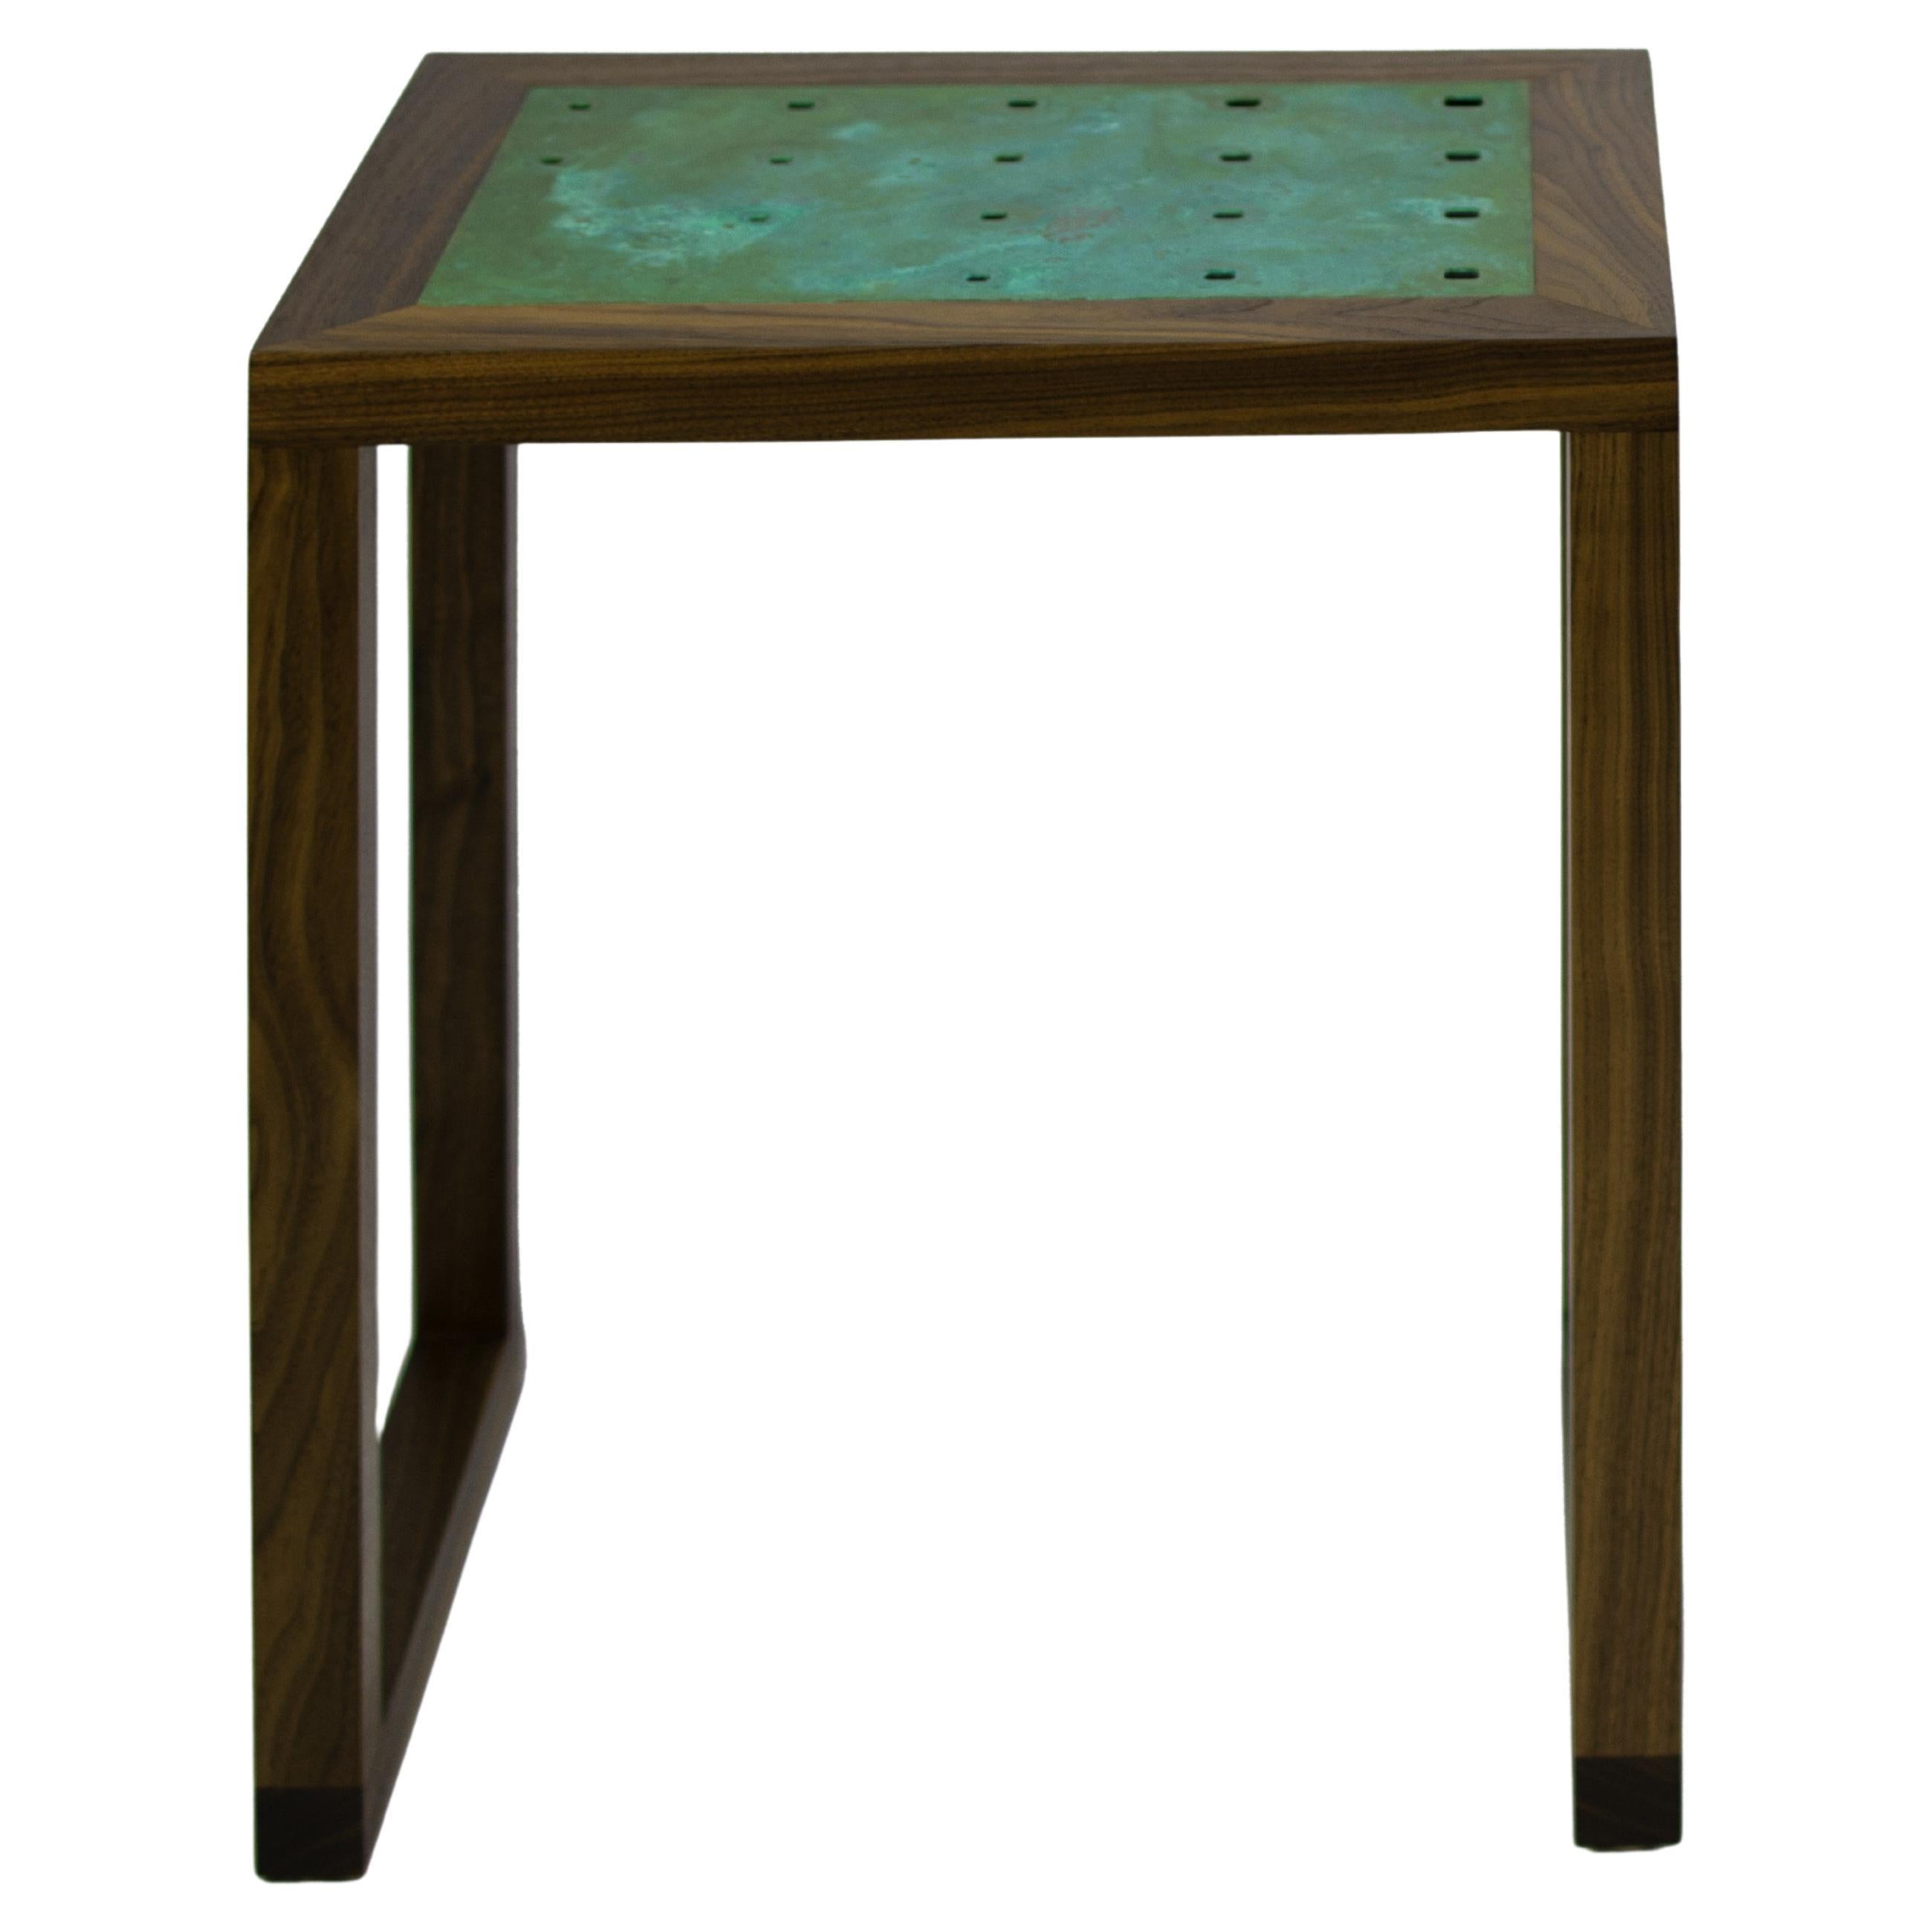 The Amplitude end table features a solid walnut frame inlaid with a patinated copper panel. The clean geometric lines and gradating hole pattern produce a simple yet dynamic form, well suited to highlight the natural beauty of the materials. Please